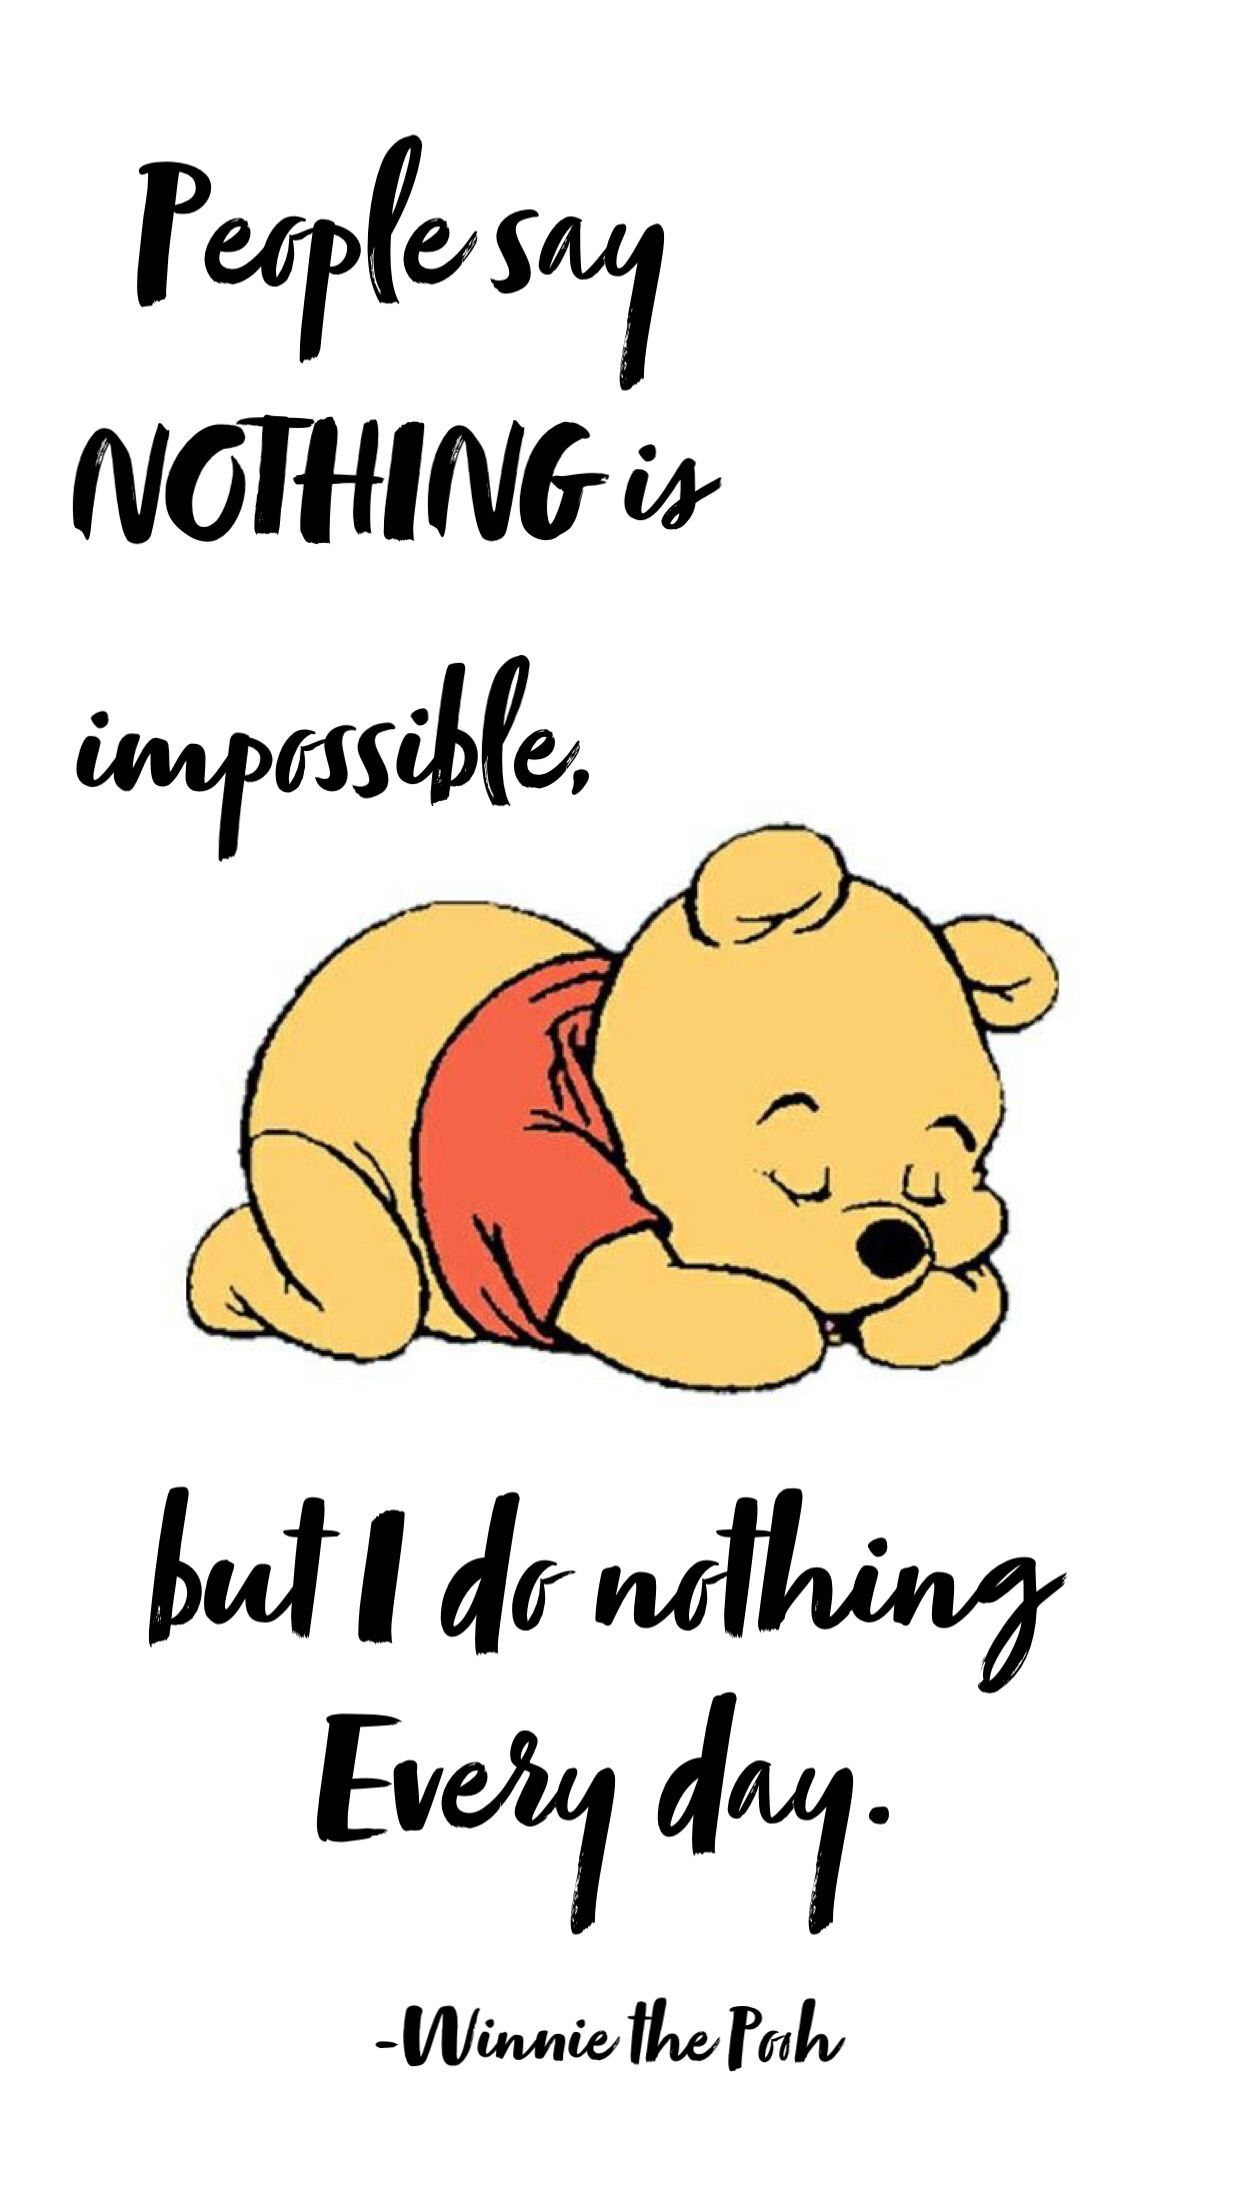 Wallpaper. Winnie the pooh quotes, Pooh quotes, Funny quotes wallpaper